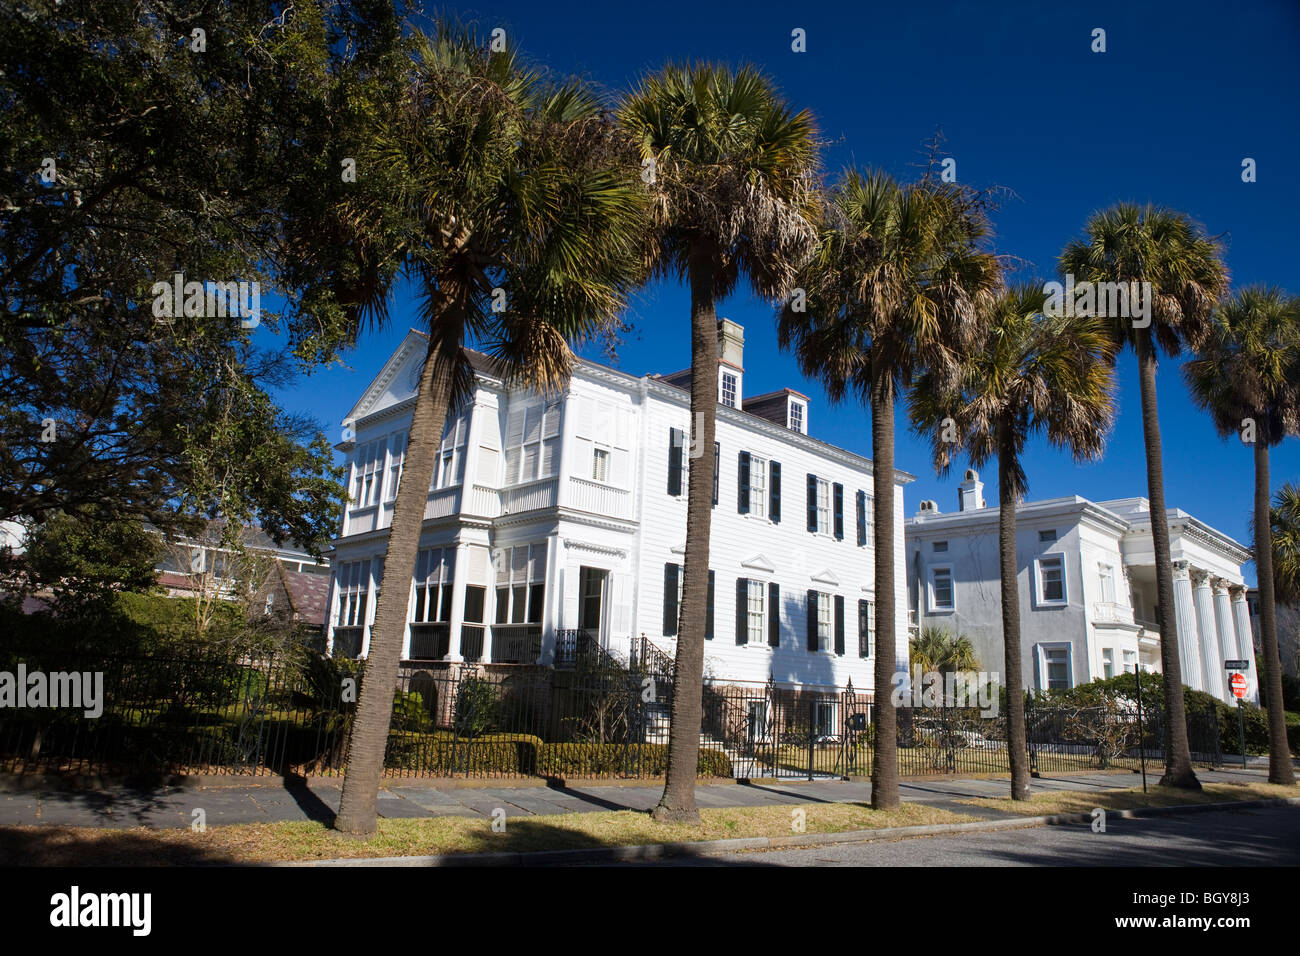 Palmetto trees line South Battery Street with large mansions, Charleston, South Carolina, United States of America. Stock Photo